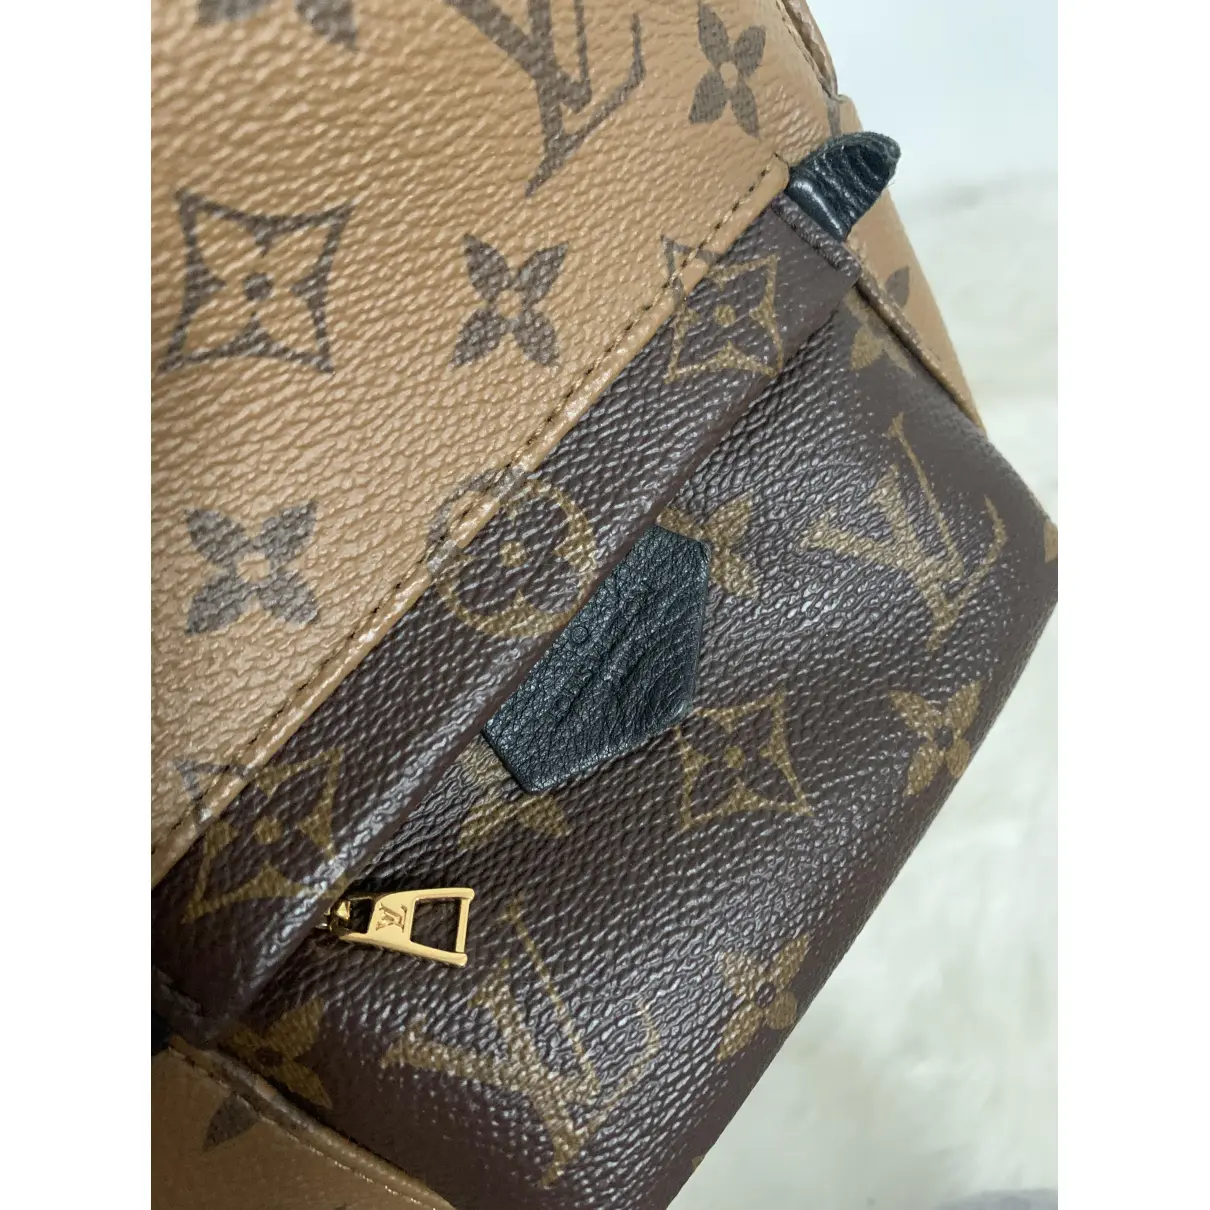 Buy Louis Vuitton Palm Springs cloth backpack online